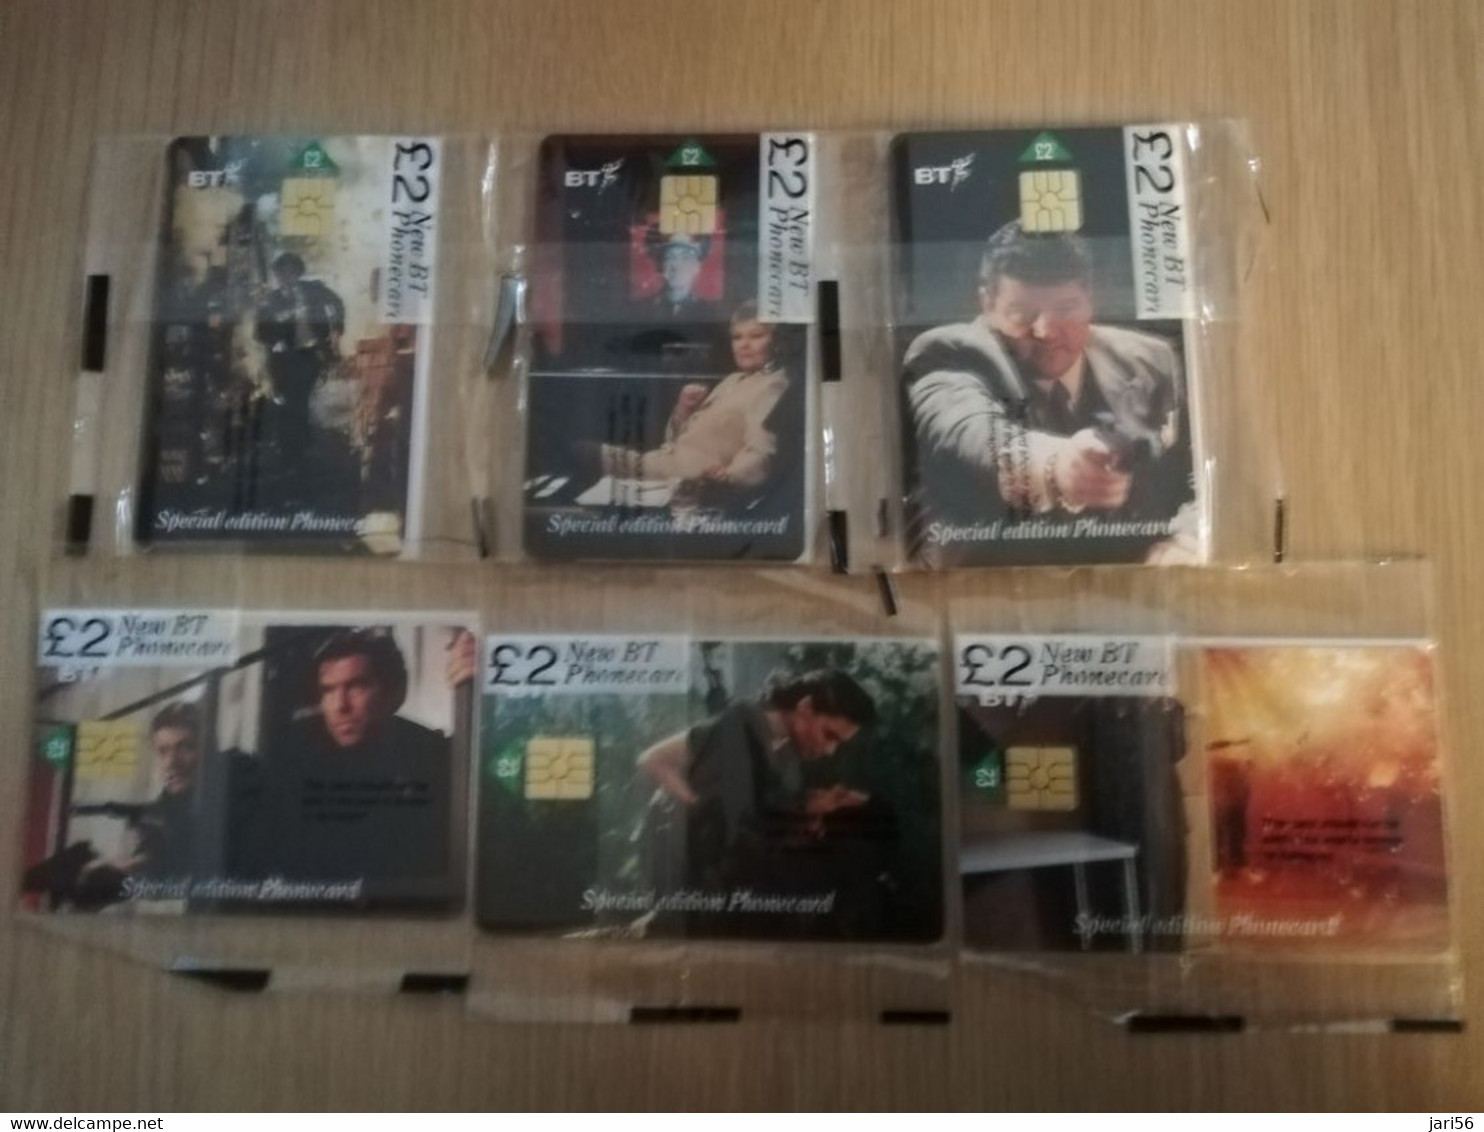 GREAT BRETAGNE  CHIPCARDS  JAMES BOND  GOLDEN EYE     SERIE 6X 2 POUND Sealed In Wrapper    MINT CONDITION      **3859** - BT General